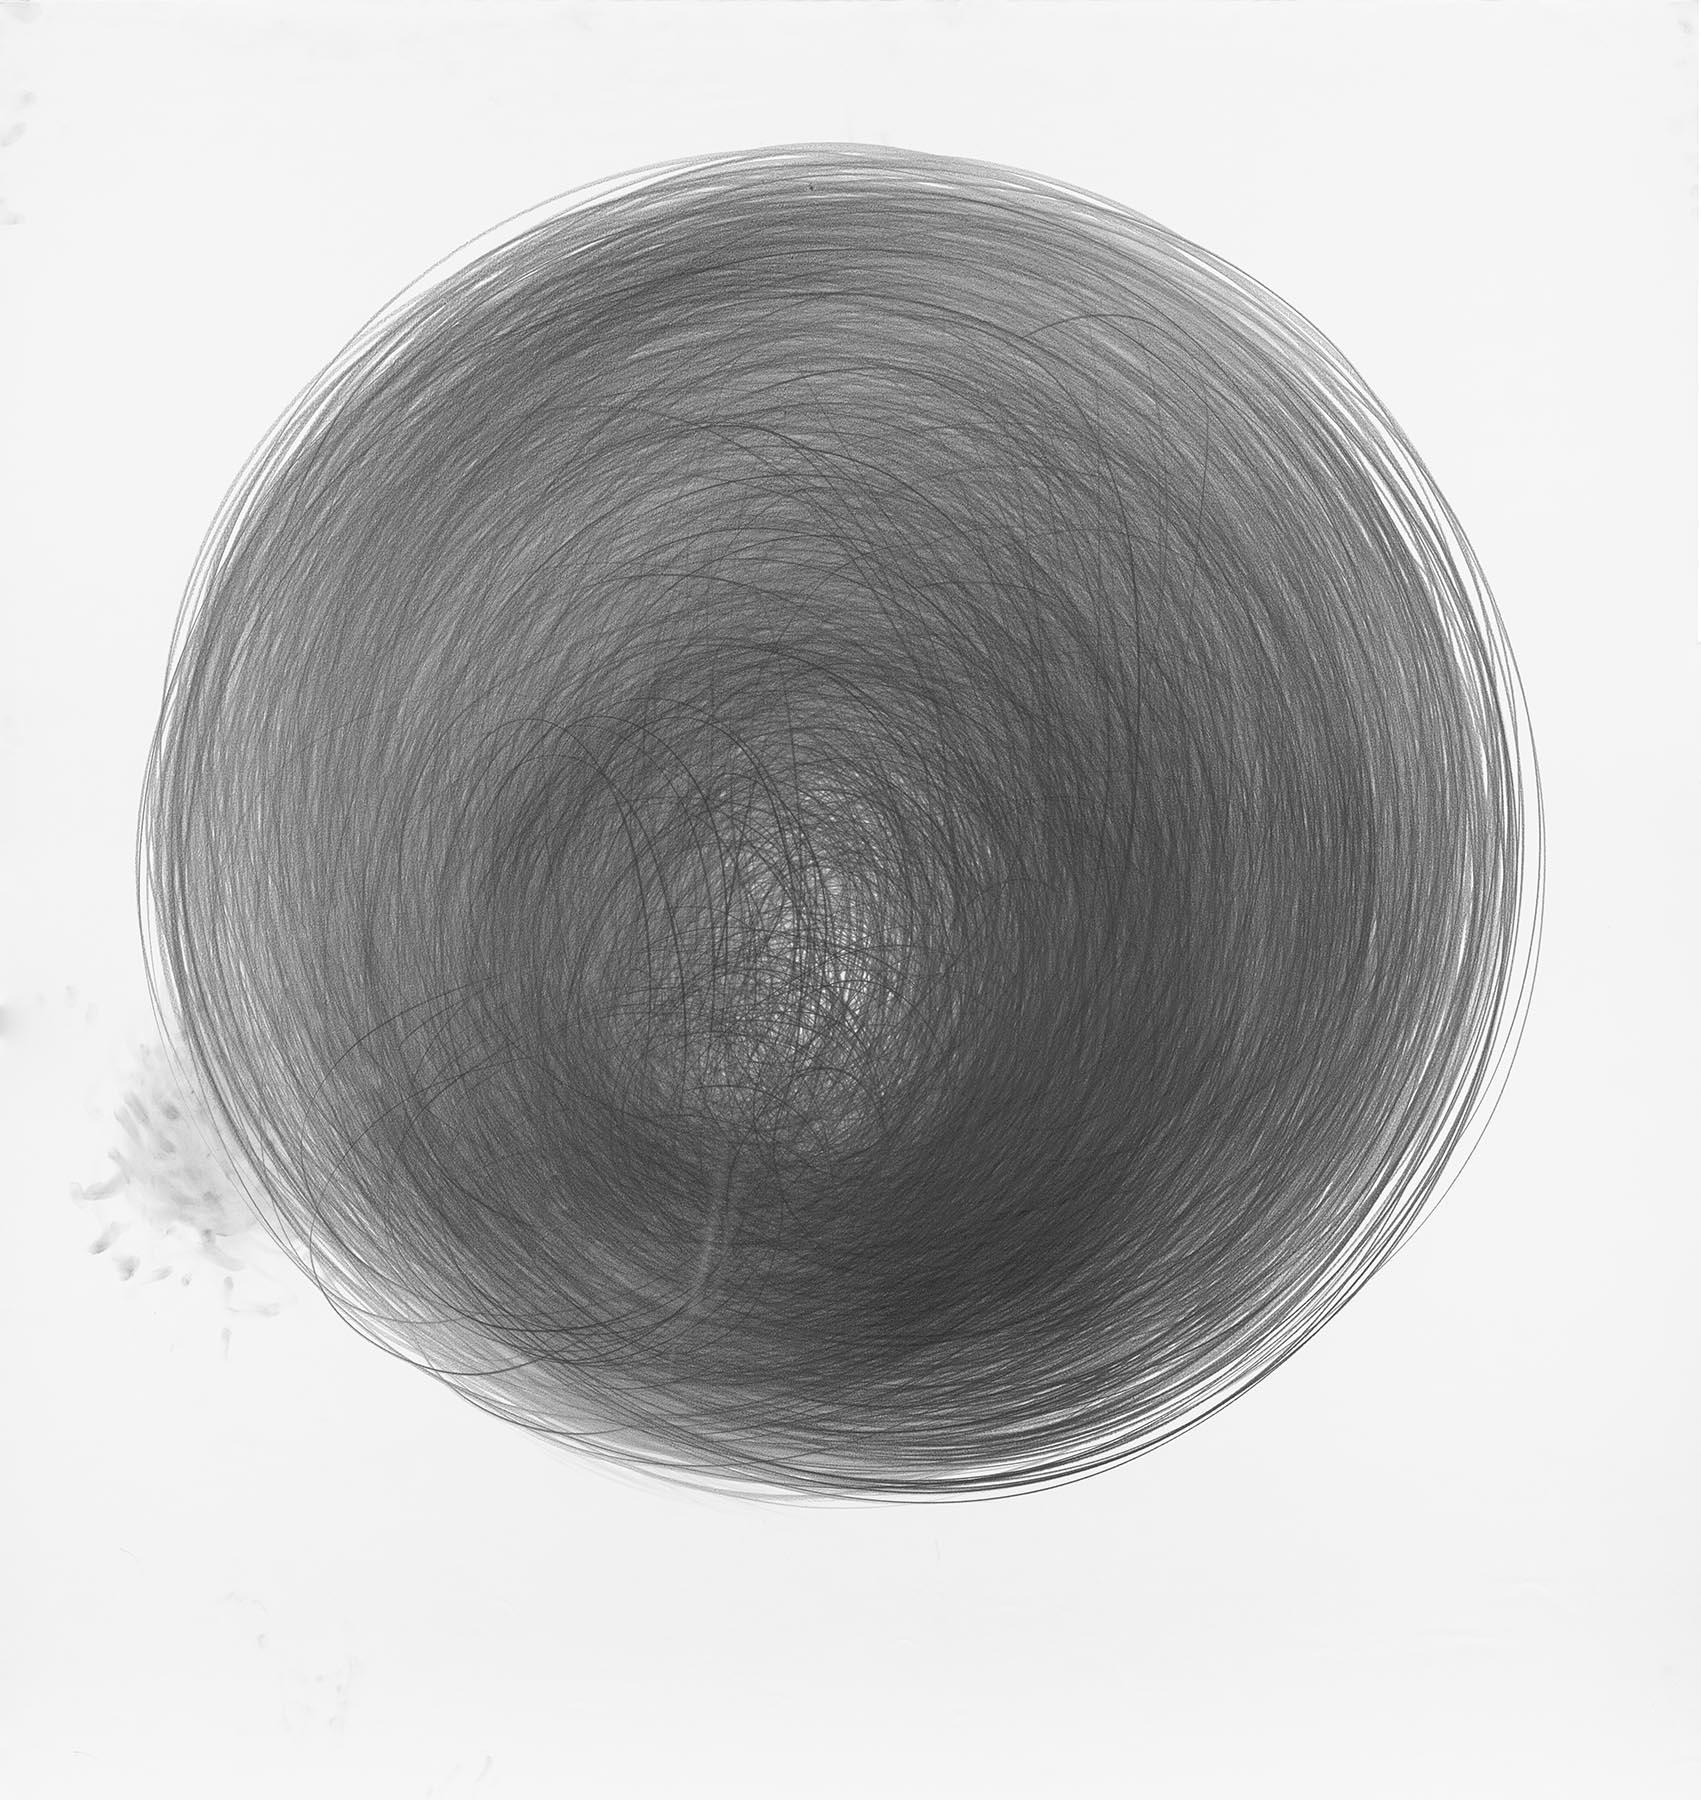 'Work no. 1 (Circle Drawing), 1hour 09minutes, 2018’ Limited Edition of 25, Lithograph Print, by Carali McCall (born 1981).  Signed and numbered by the artist.

McCall began her ‘Circle Drawing' artworks in 2004 where she focuses on the durational